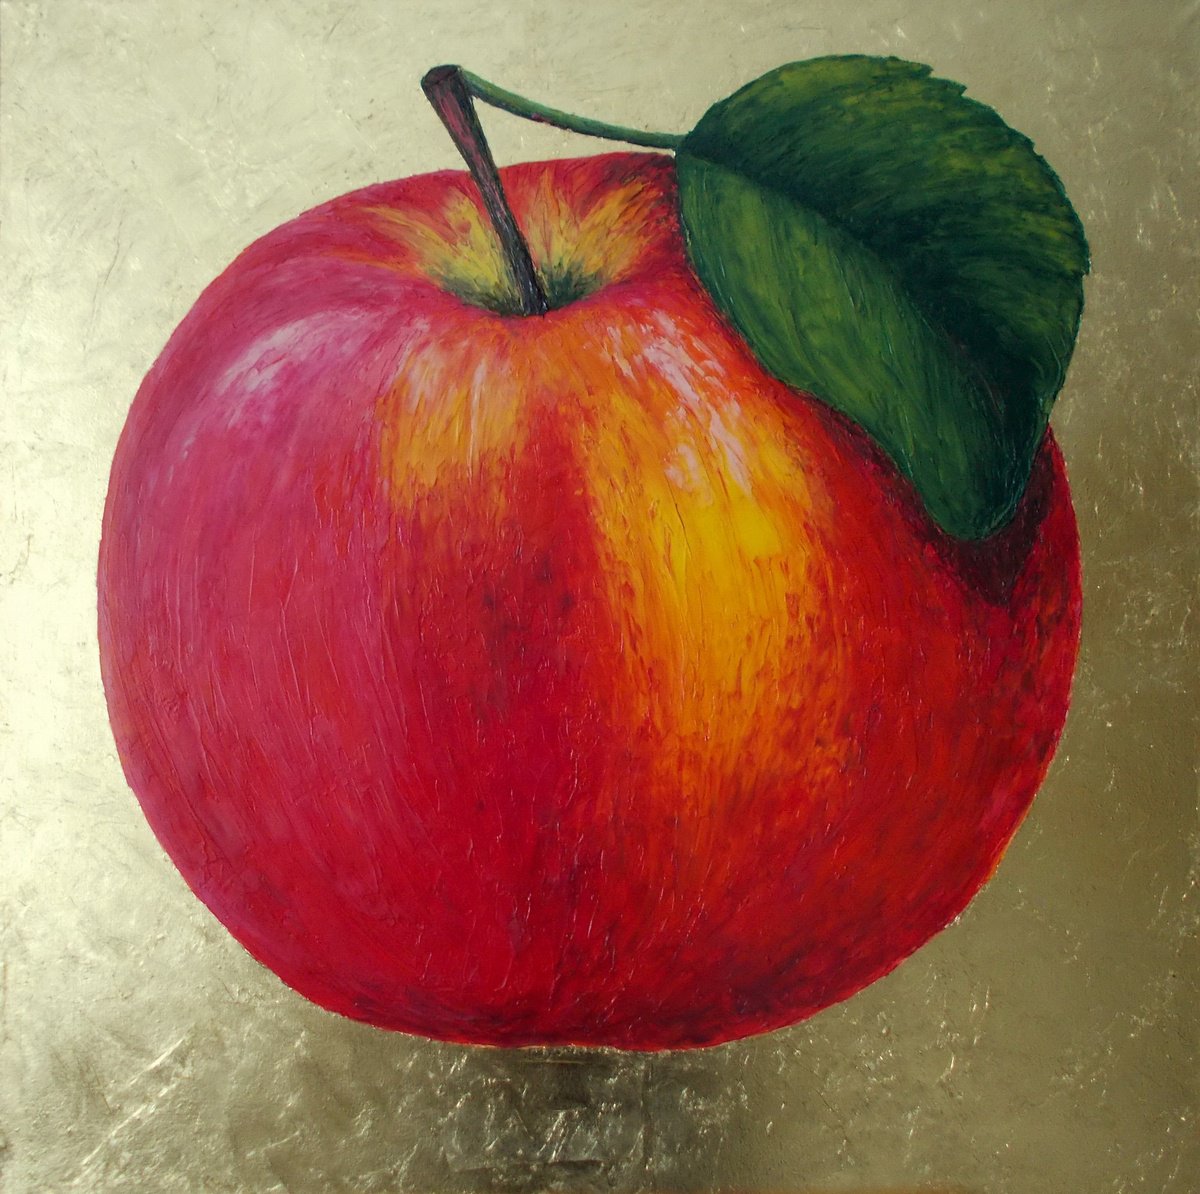 "Red Apple in the Gold of the Sun" by Tatyana Mironova